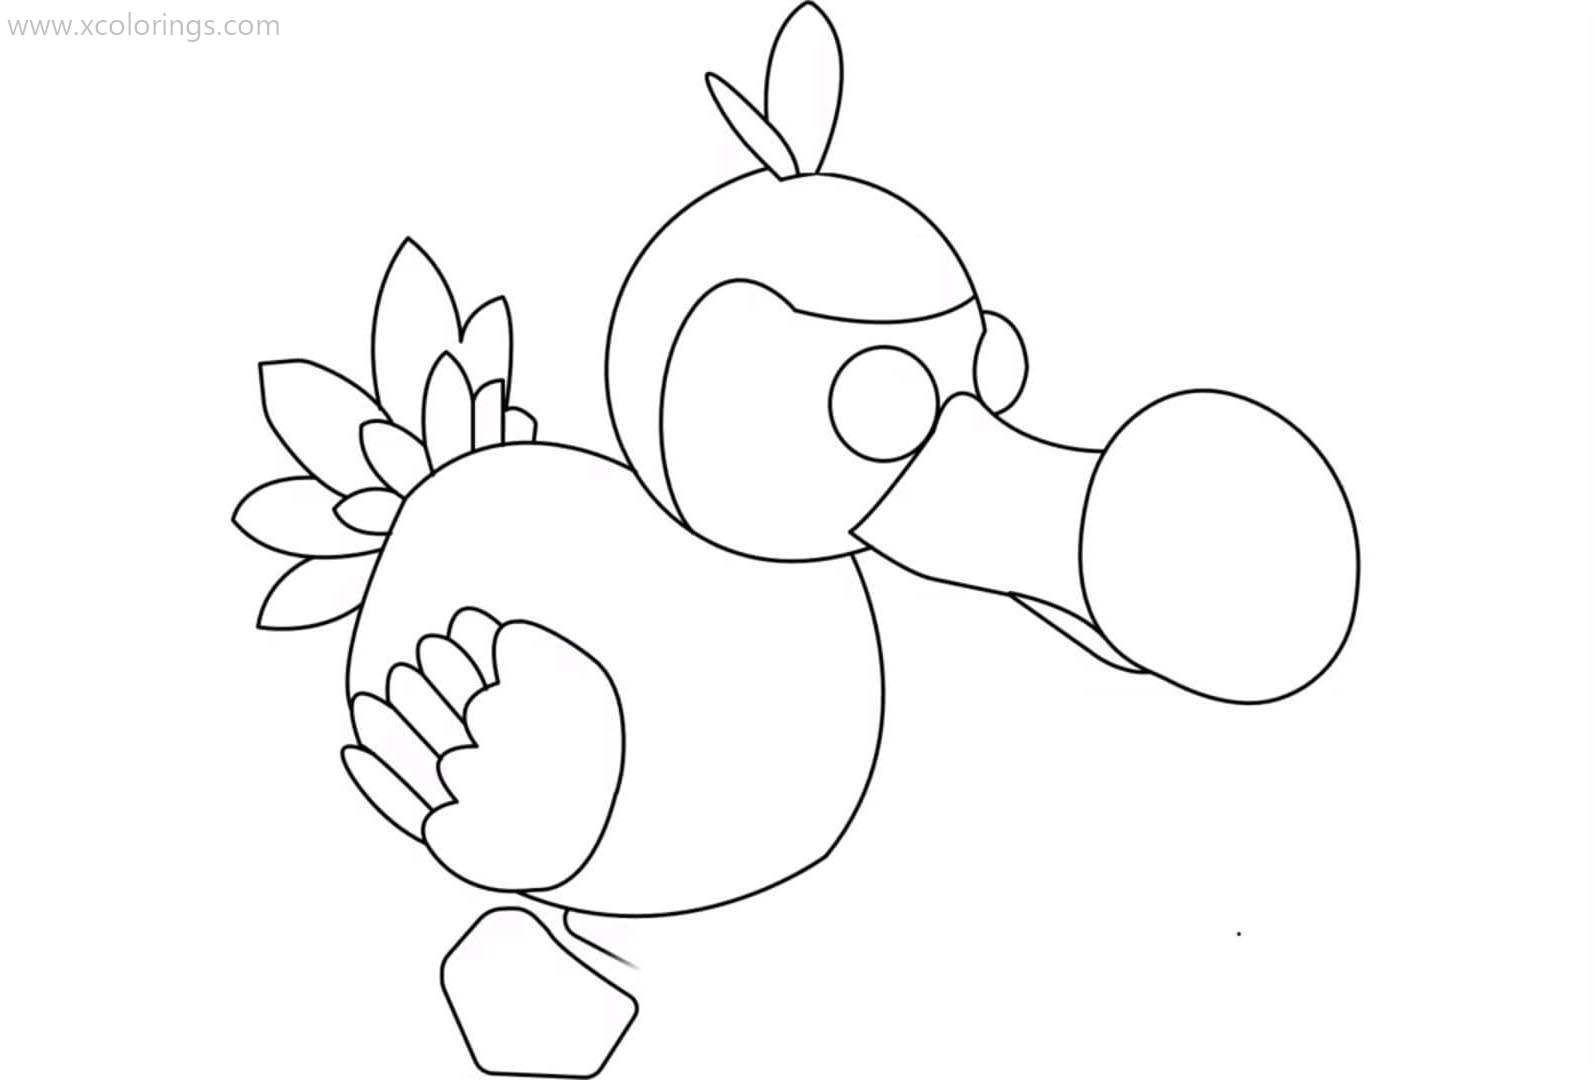 Roblox Adopt Me Coloring Page Dodo. Pets Drawing, Pokemon Coloring Page ...